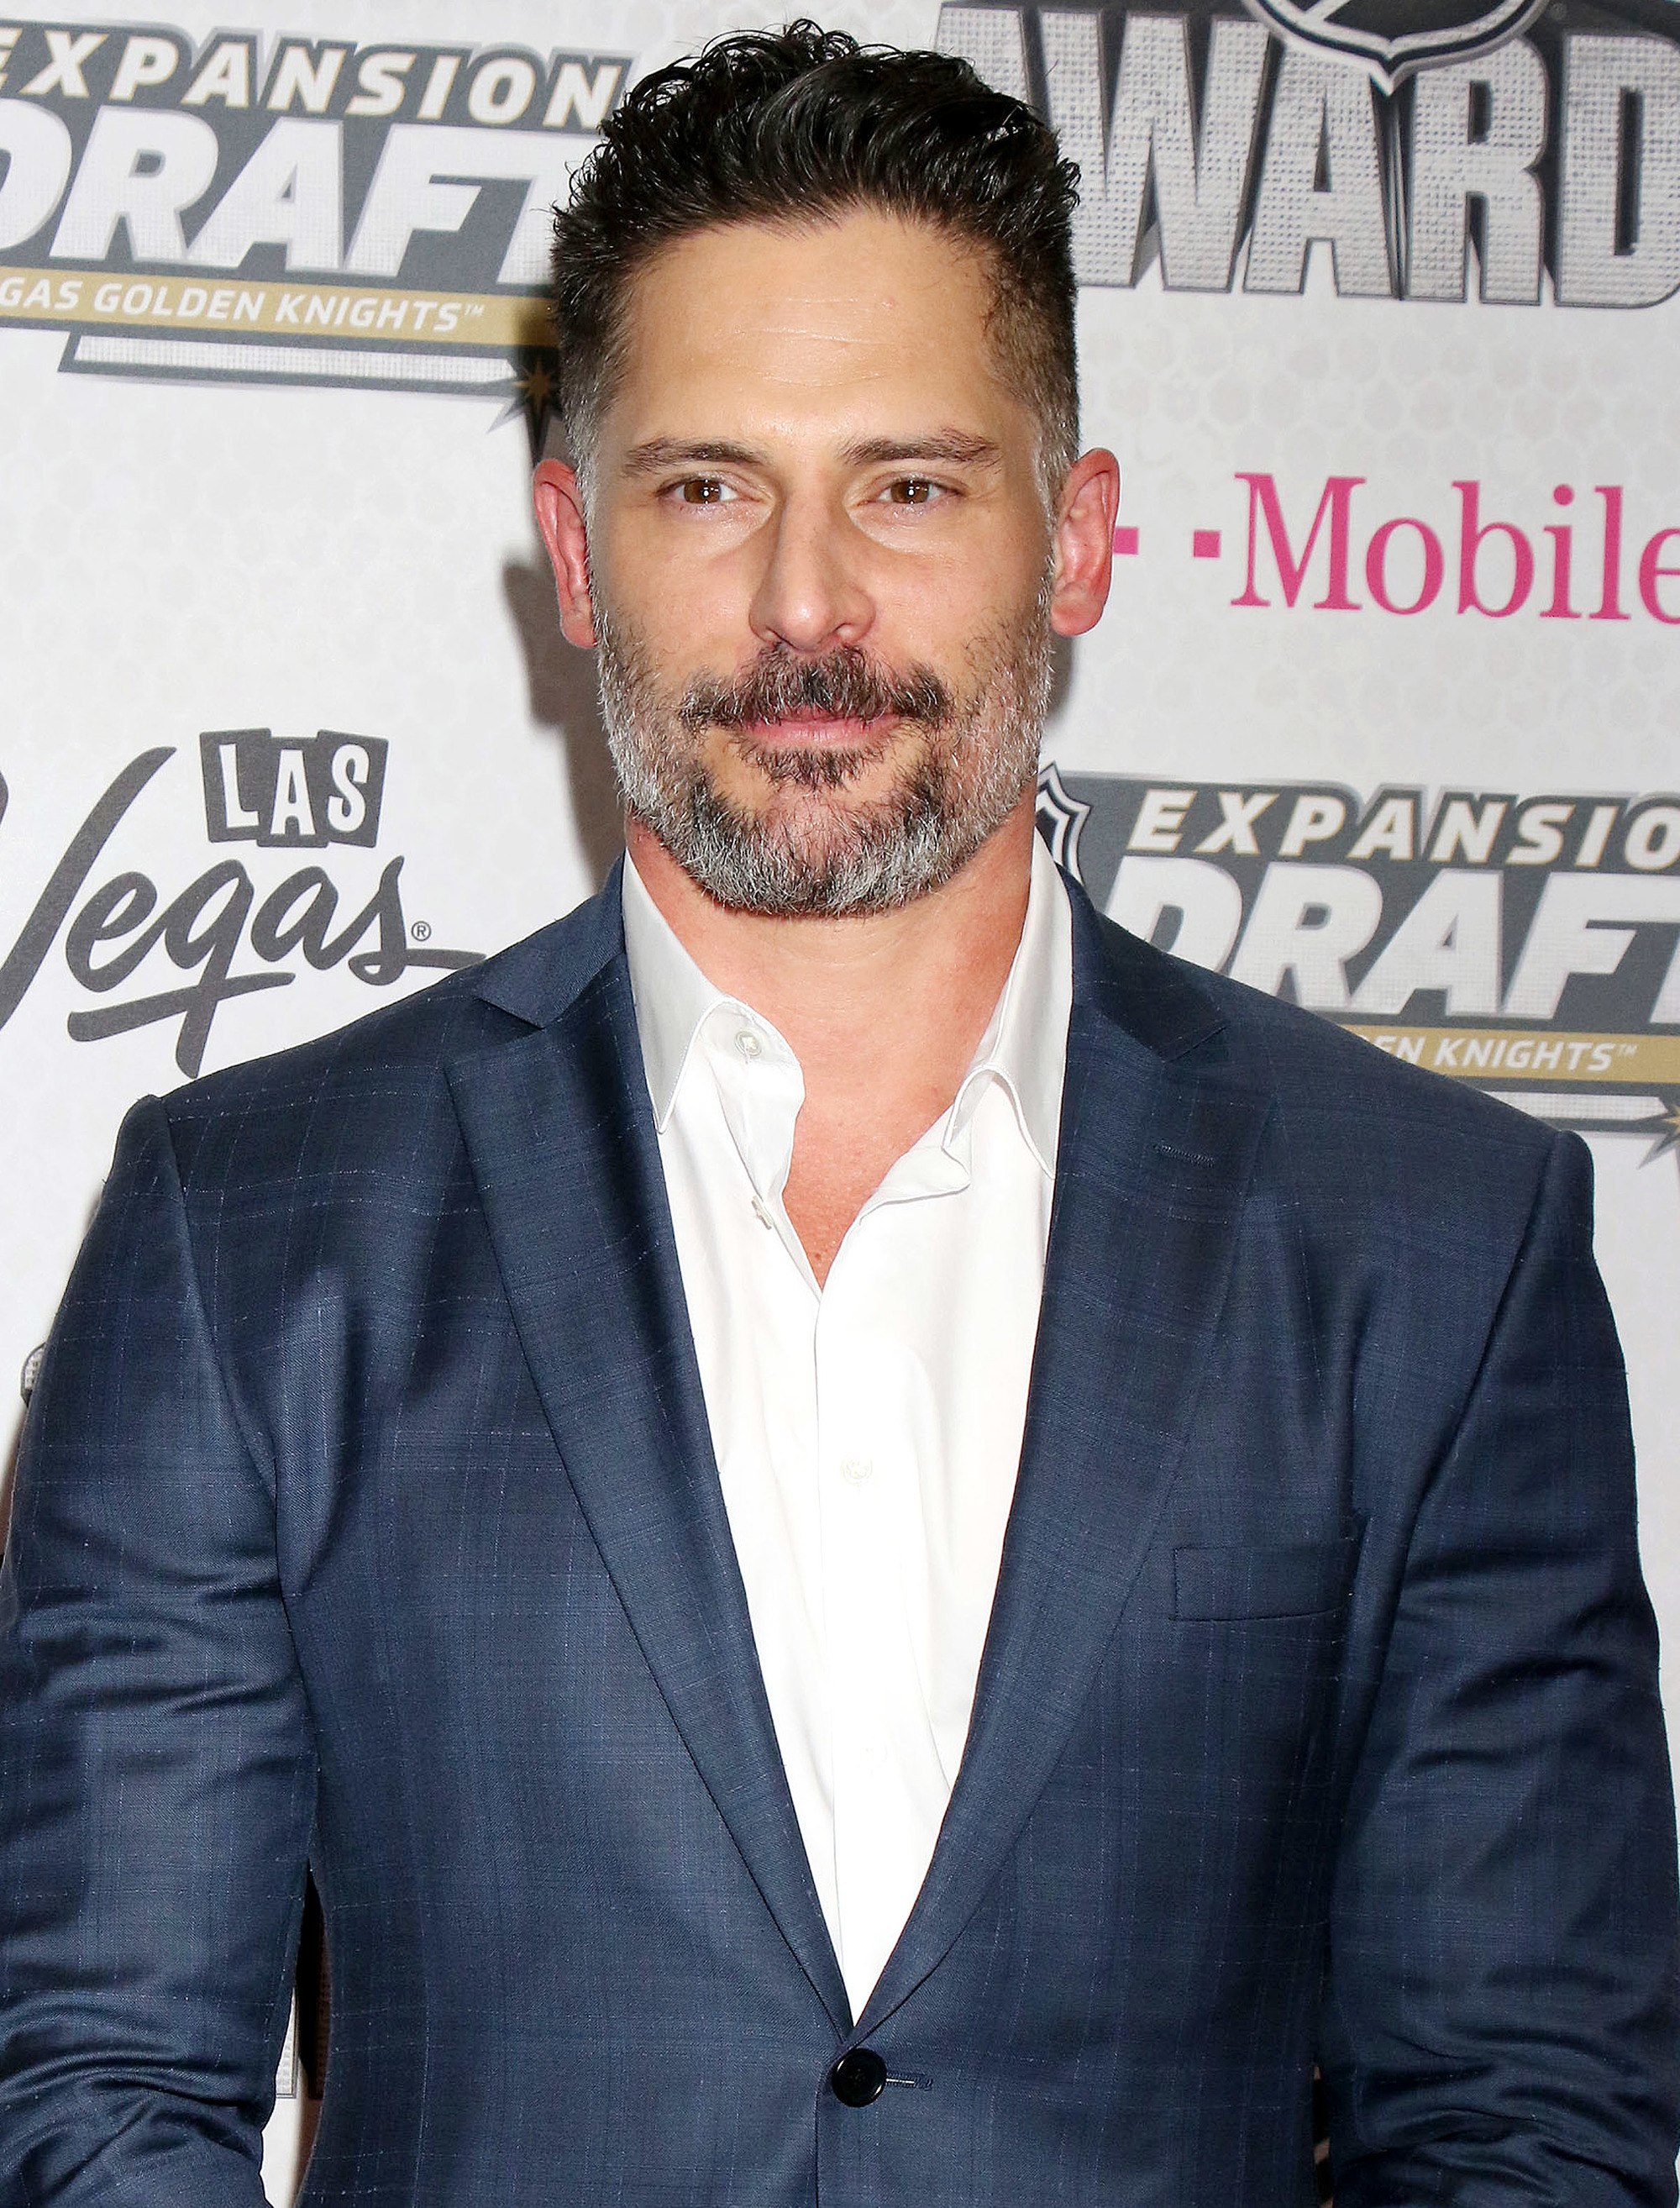 Hairstyles for men over 40: Photo of Joe Manganiello with gelled up brown hair and grey facial hair, wearing a white shirt and blue suit jacket